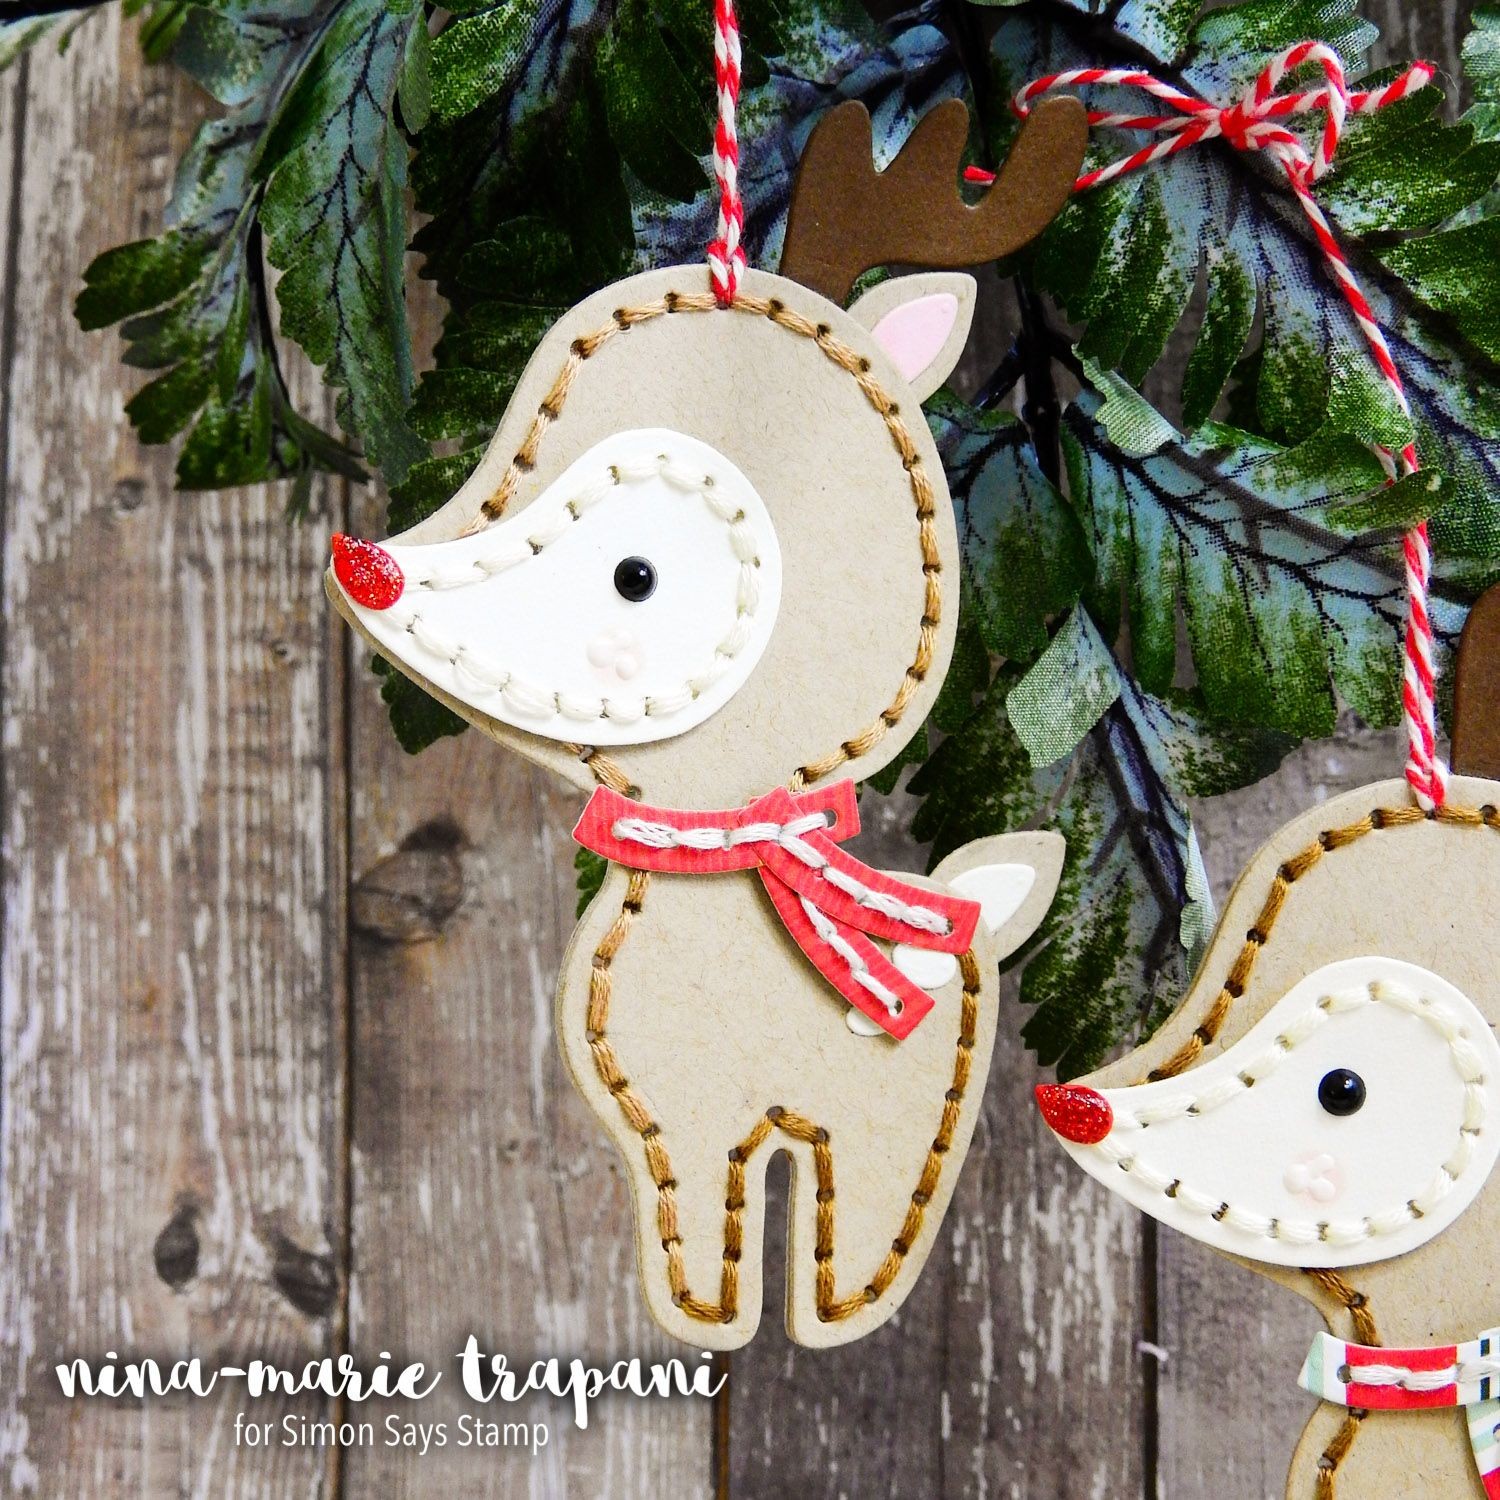 Papercraft Christmas ornaments Studio Monday with Nina Marie Kindness Day Handmade Paper ornament